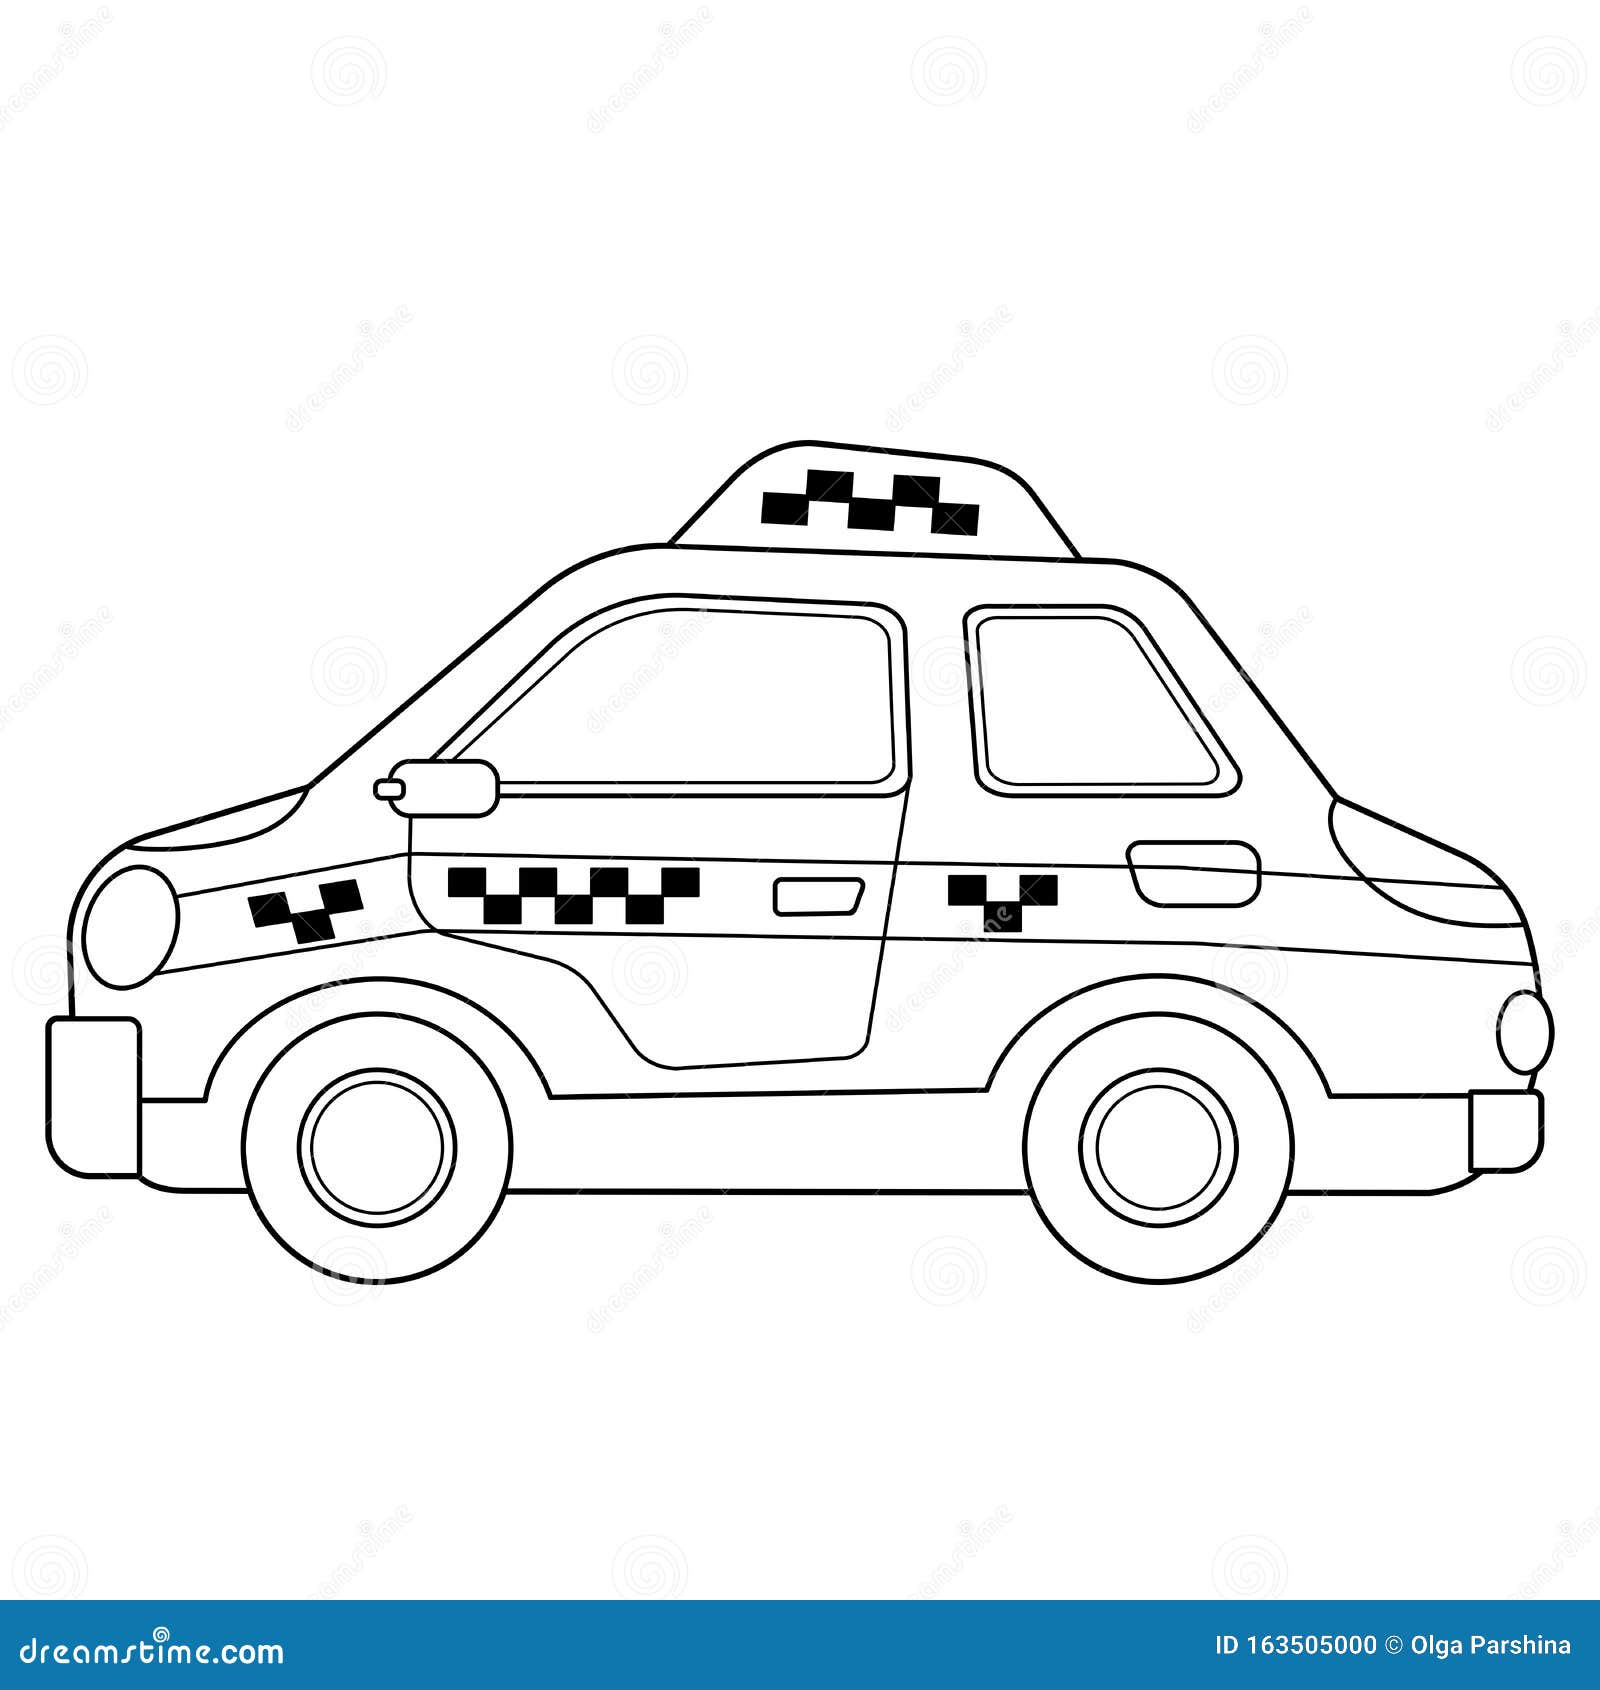 Download Coloring Page Outline Of Cartoon Car. Taxi. Images ...